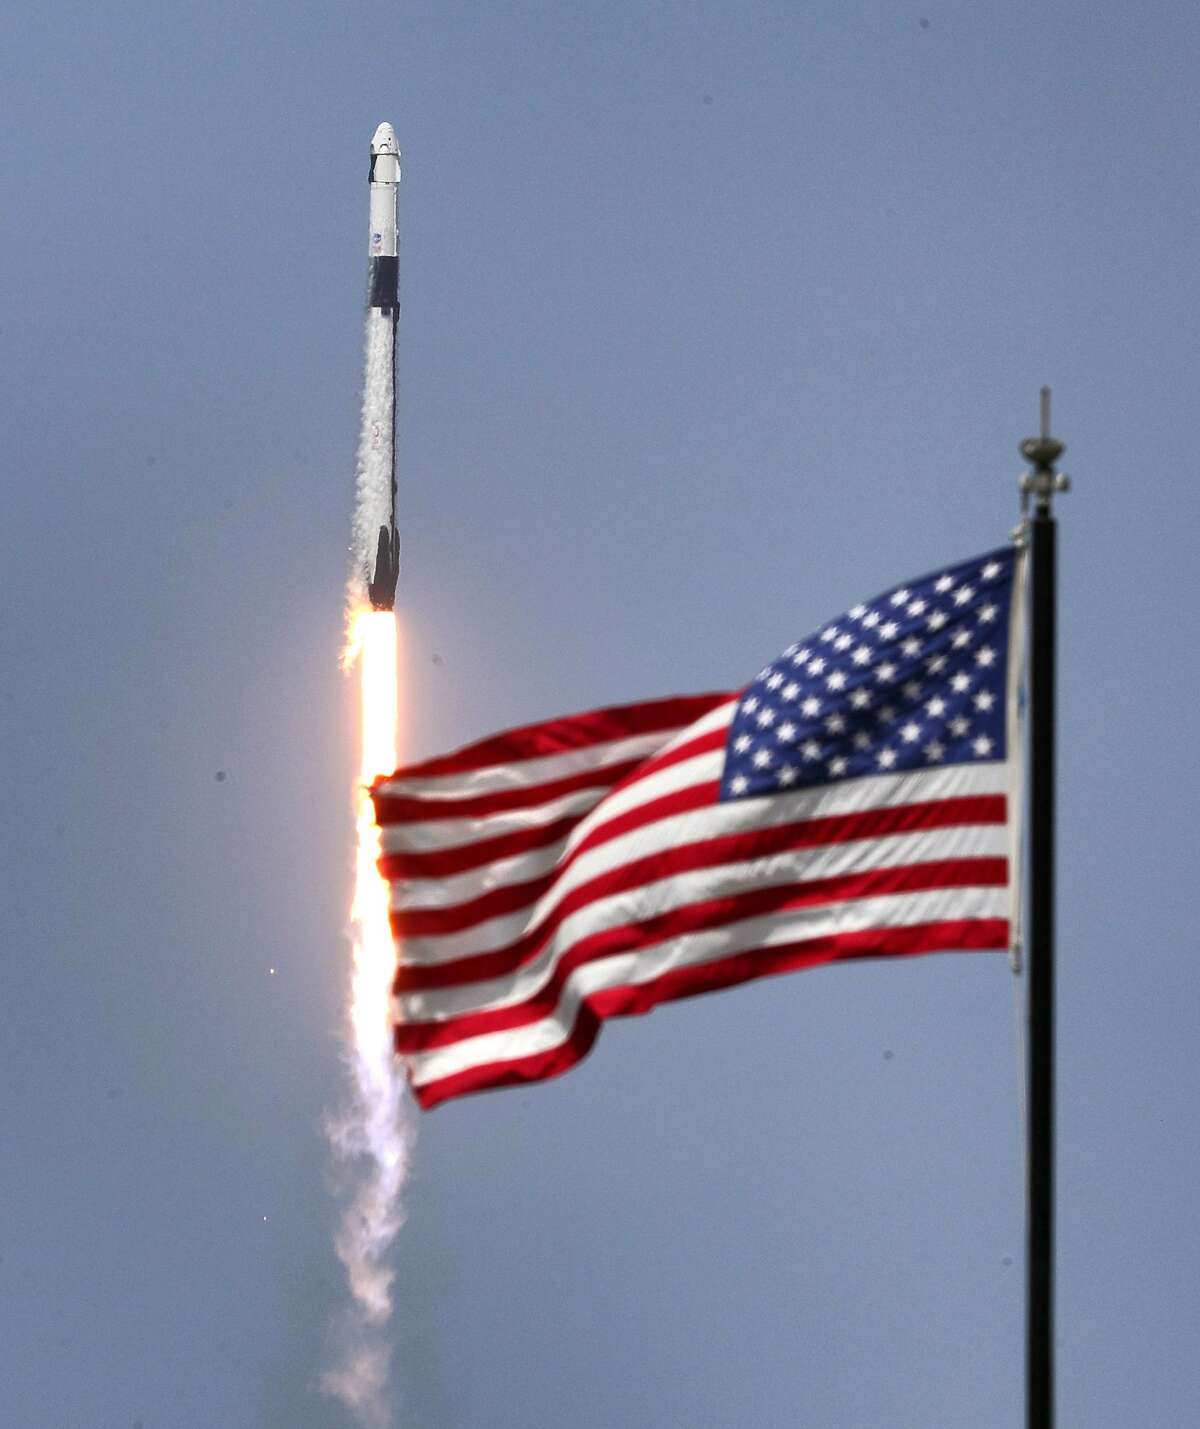 The SpaceX Falcon 9 rocket, carrying astronauts Doug Hurley and Bob Behnken in the Crew Dragon capsule, lifts off from Kennedy Space Center, Fla., on Saturday, May 30, 2020. The SpaceX Demo-2 mission is the first crewed launch of an orbital spaceflight from the U.S. in nearly a decade. (Joe Burbank/Orlando Sentinel/TNS)